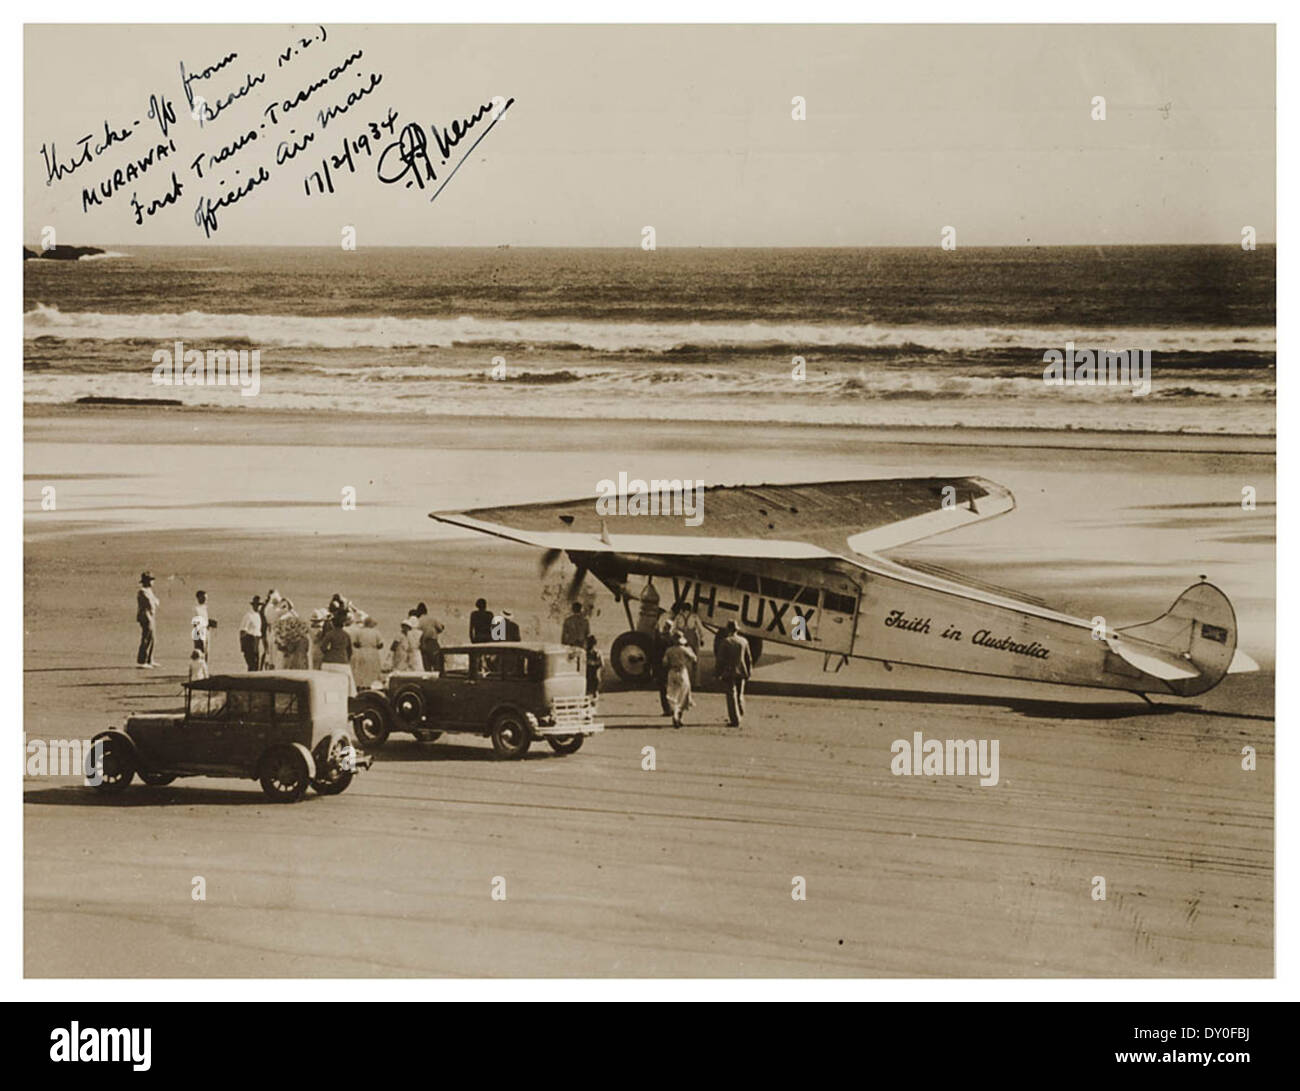 Faith in Australia on the beach at Murawai [Muriwai] ready for take-off with First Official Airmail from N.Z. to Australia, 17 Feb 1934 Stock Photo